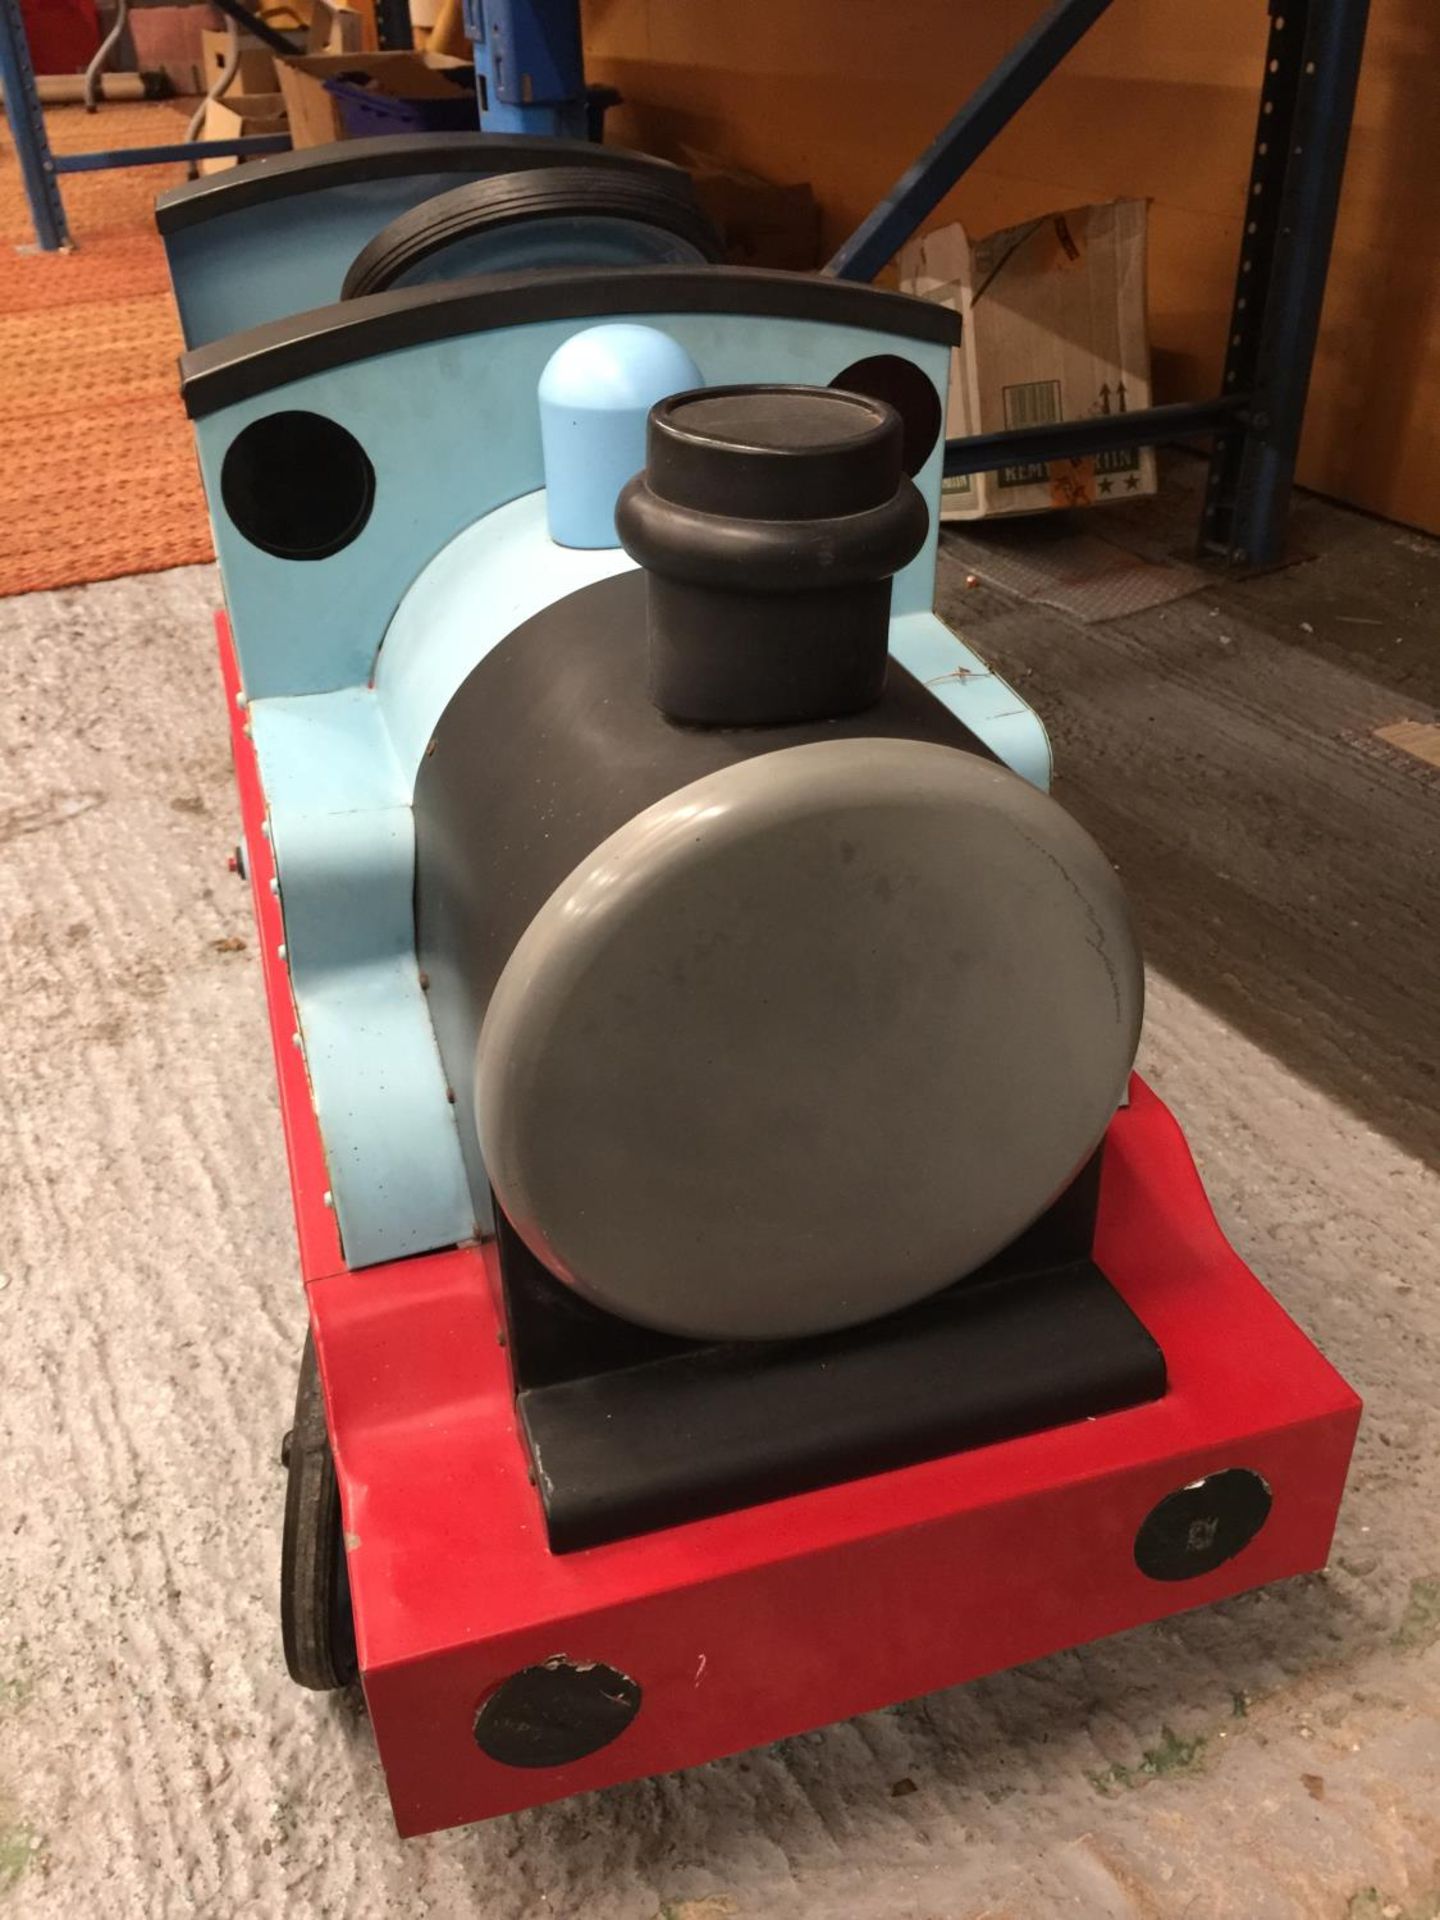 A THOMAS THE TANK ENGINE STYLE METAL PEDAL TRAIN - Image 2 of 5